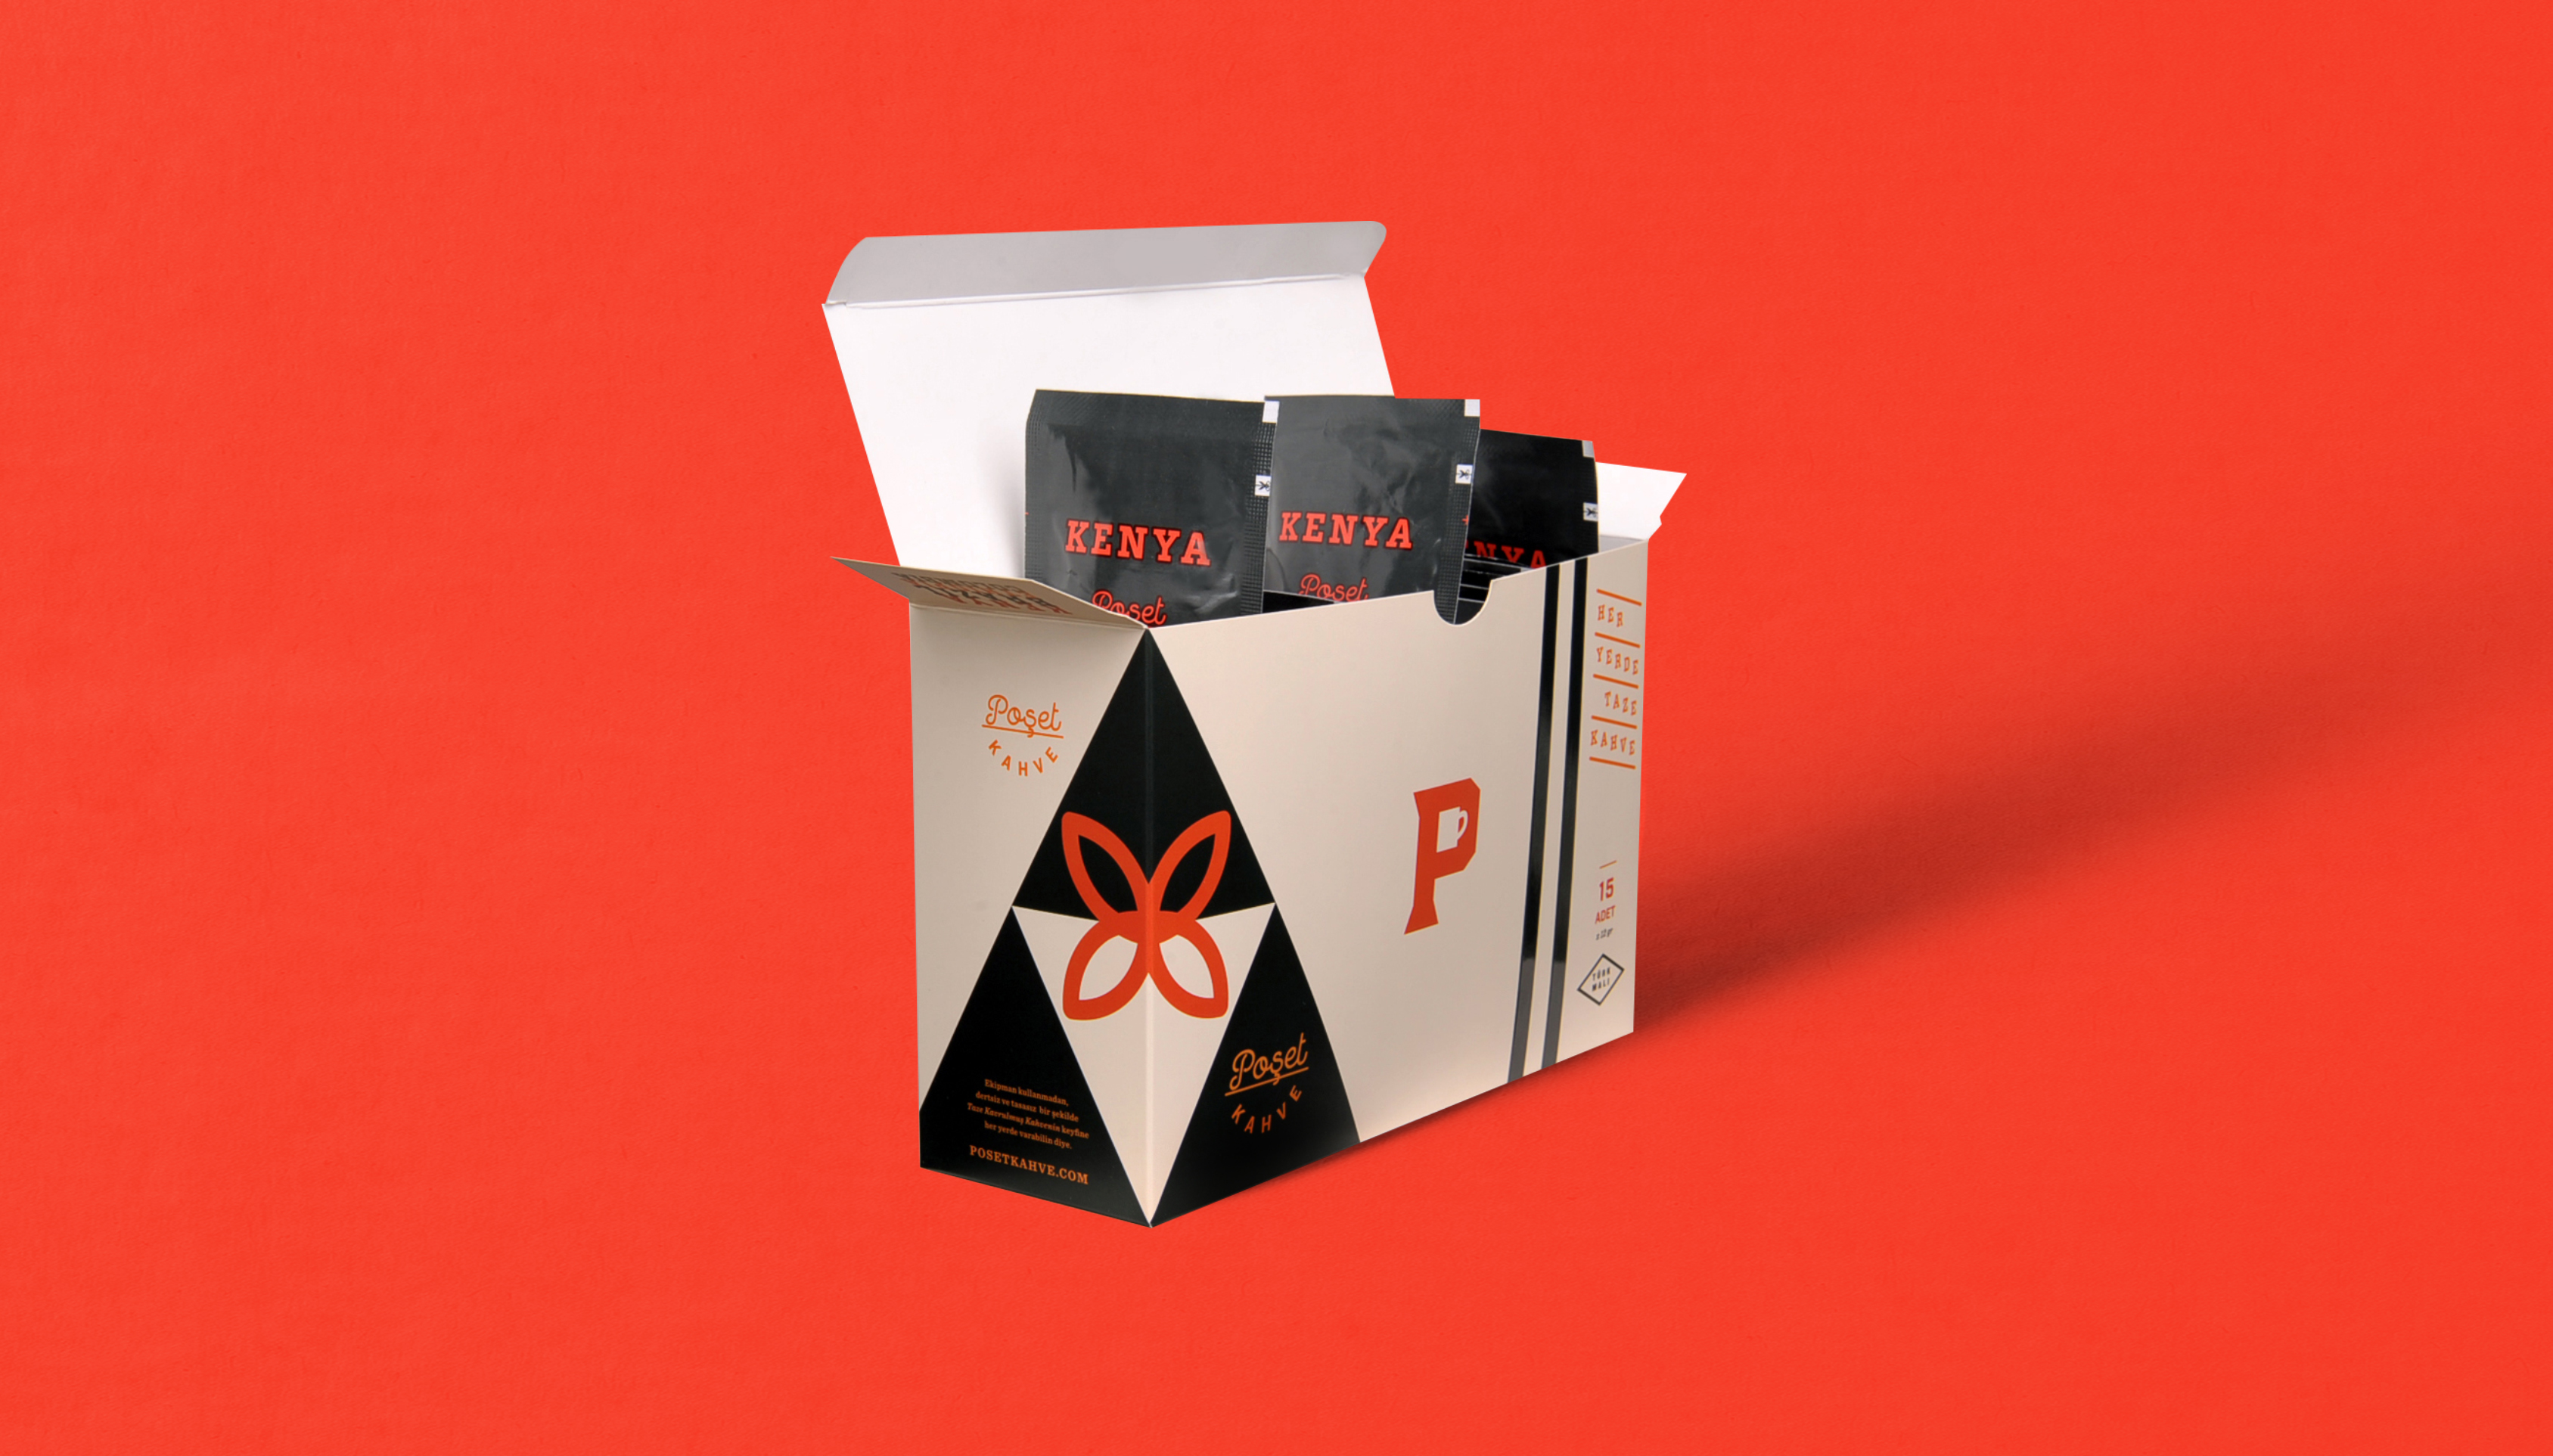 Exclusive Mockups for Branding and Packaging Design